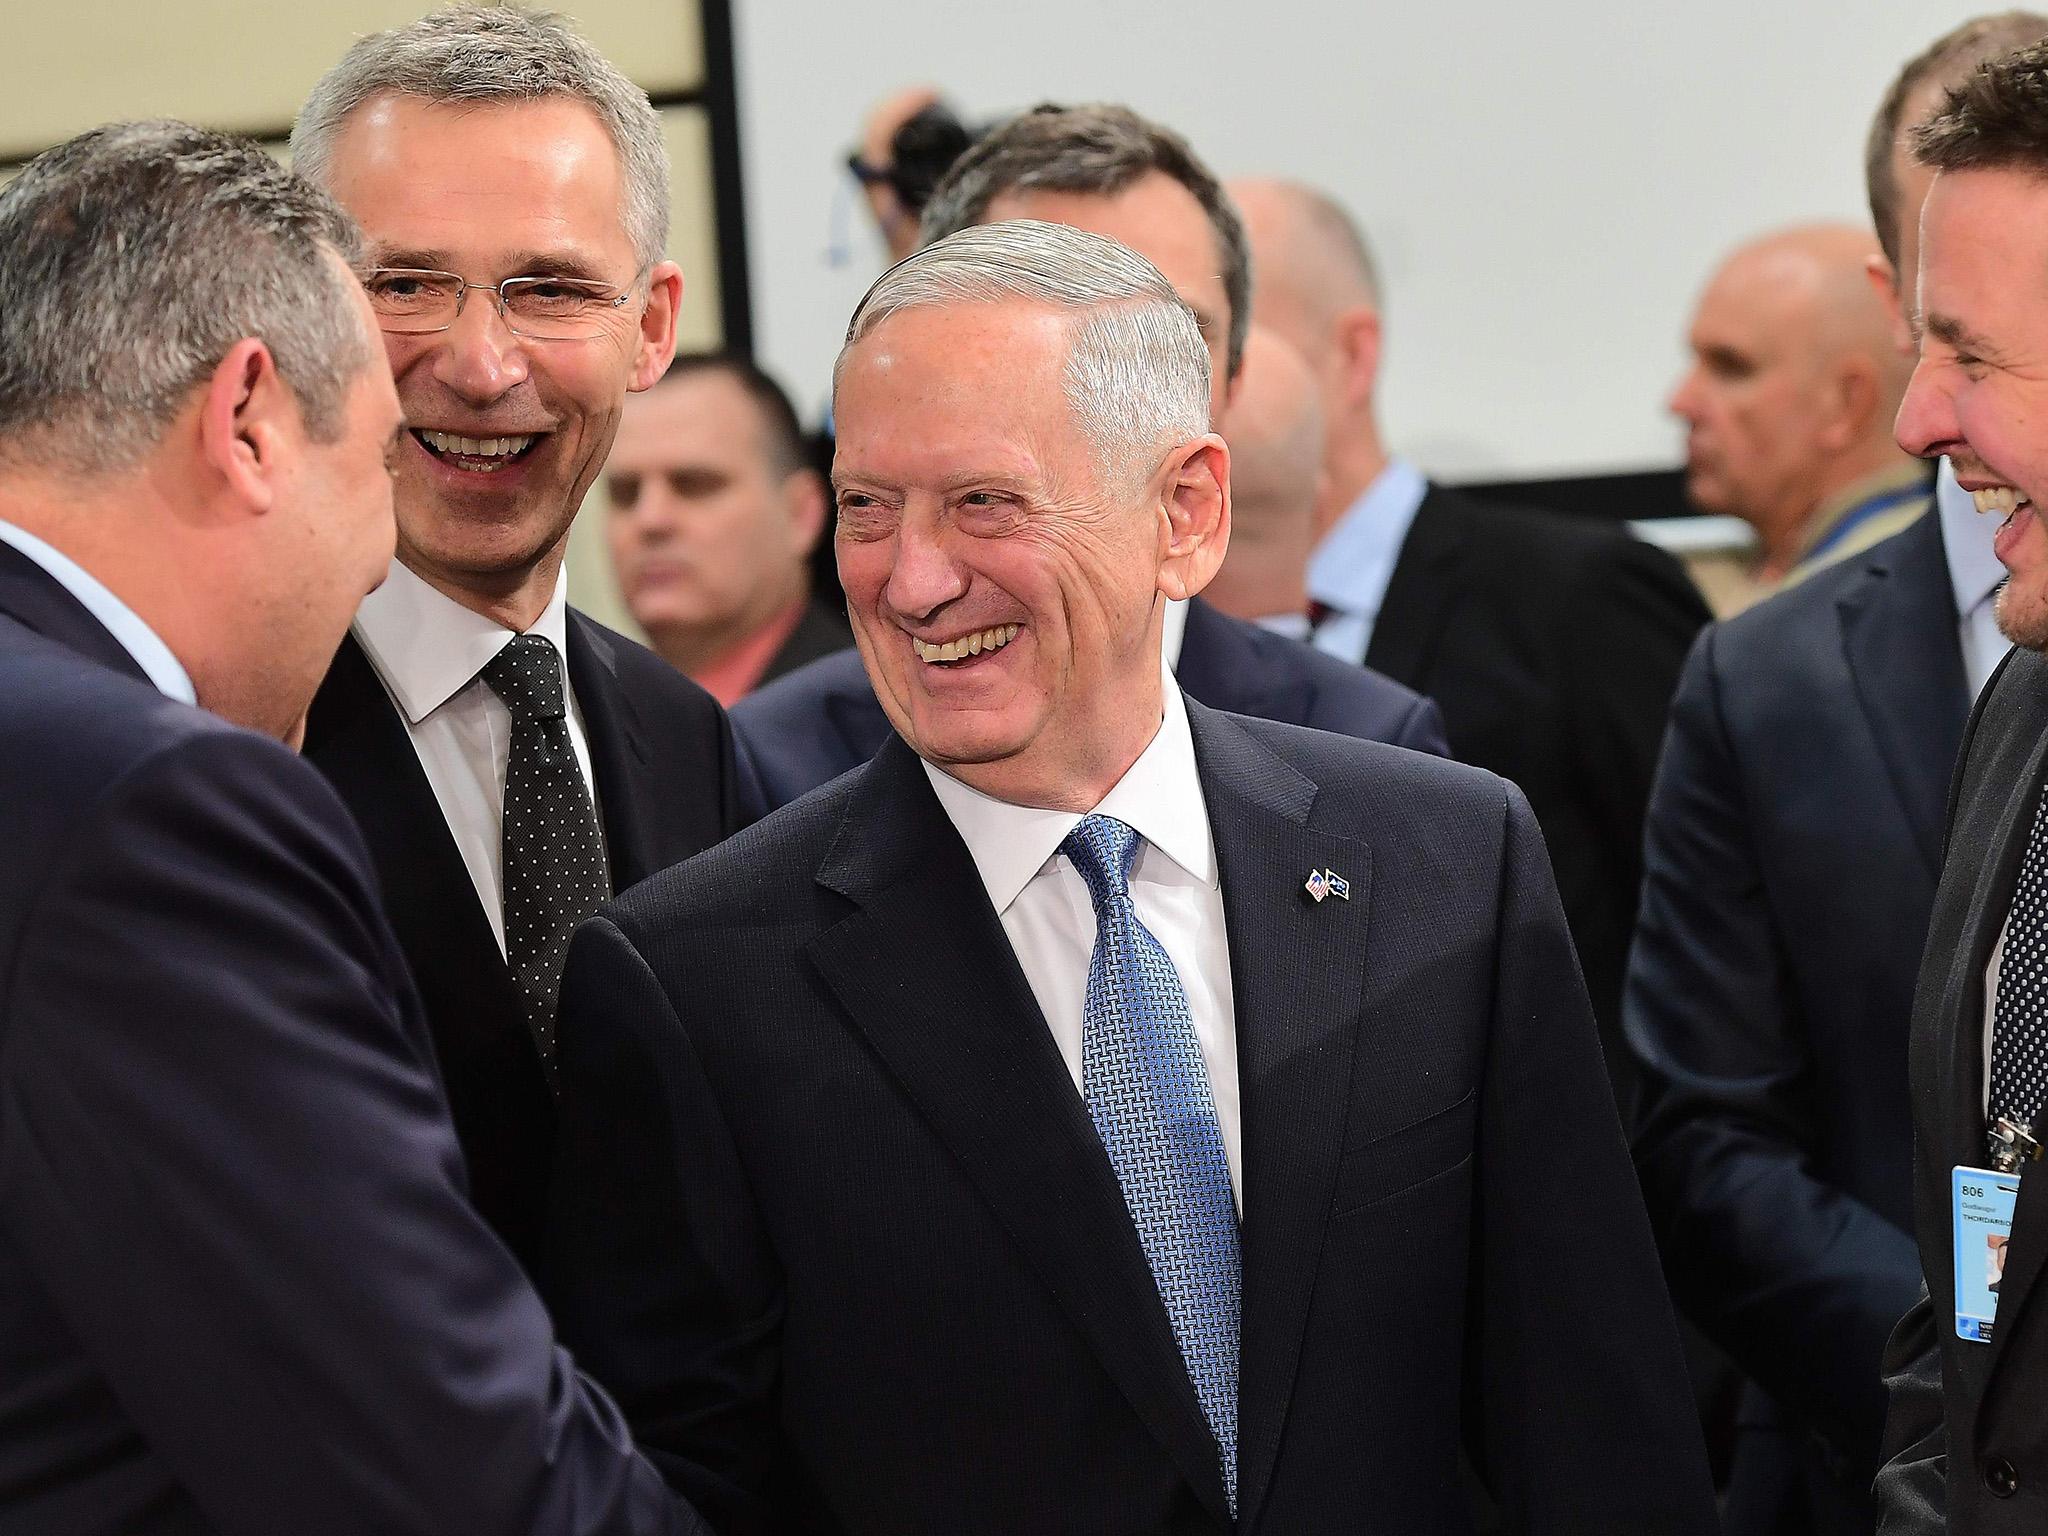 US Defence Secretary James Mattis (centre) with Nato Secretary General Jens Stoltenberg (second from left) and Greece’s defence minister Panos Kammenos (left) at the summit in Brussels